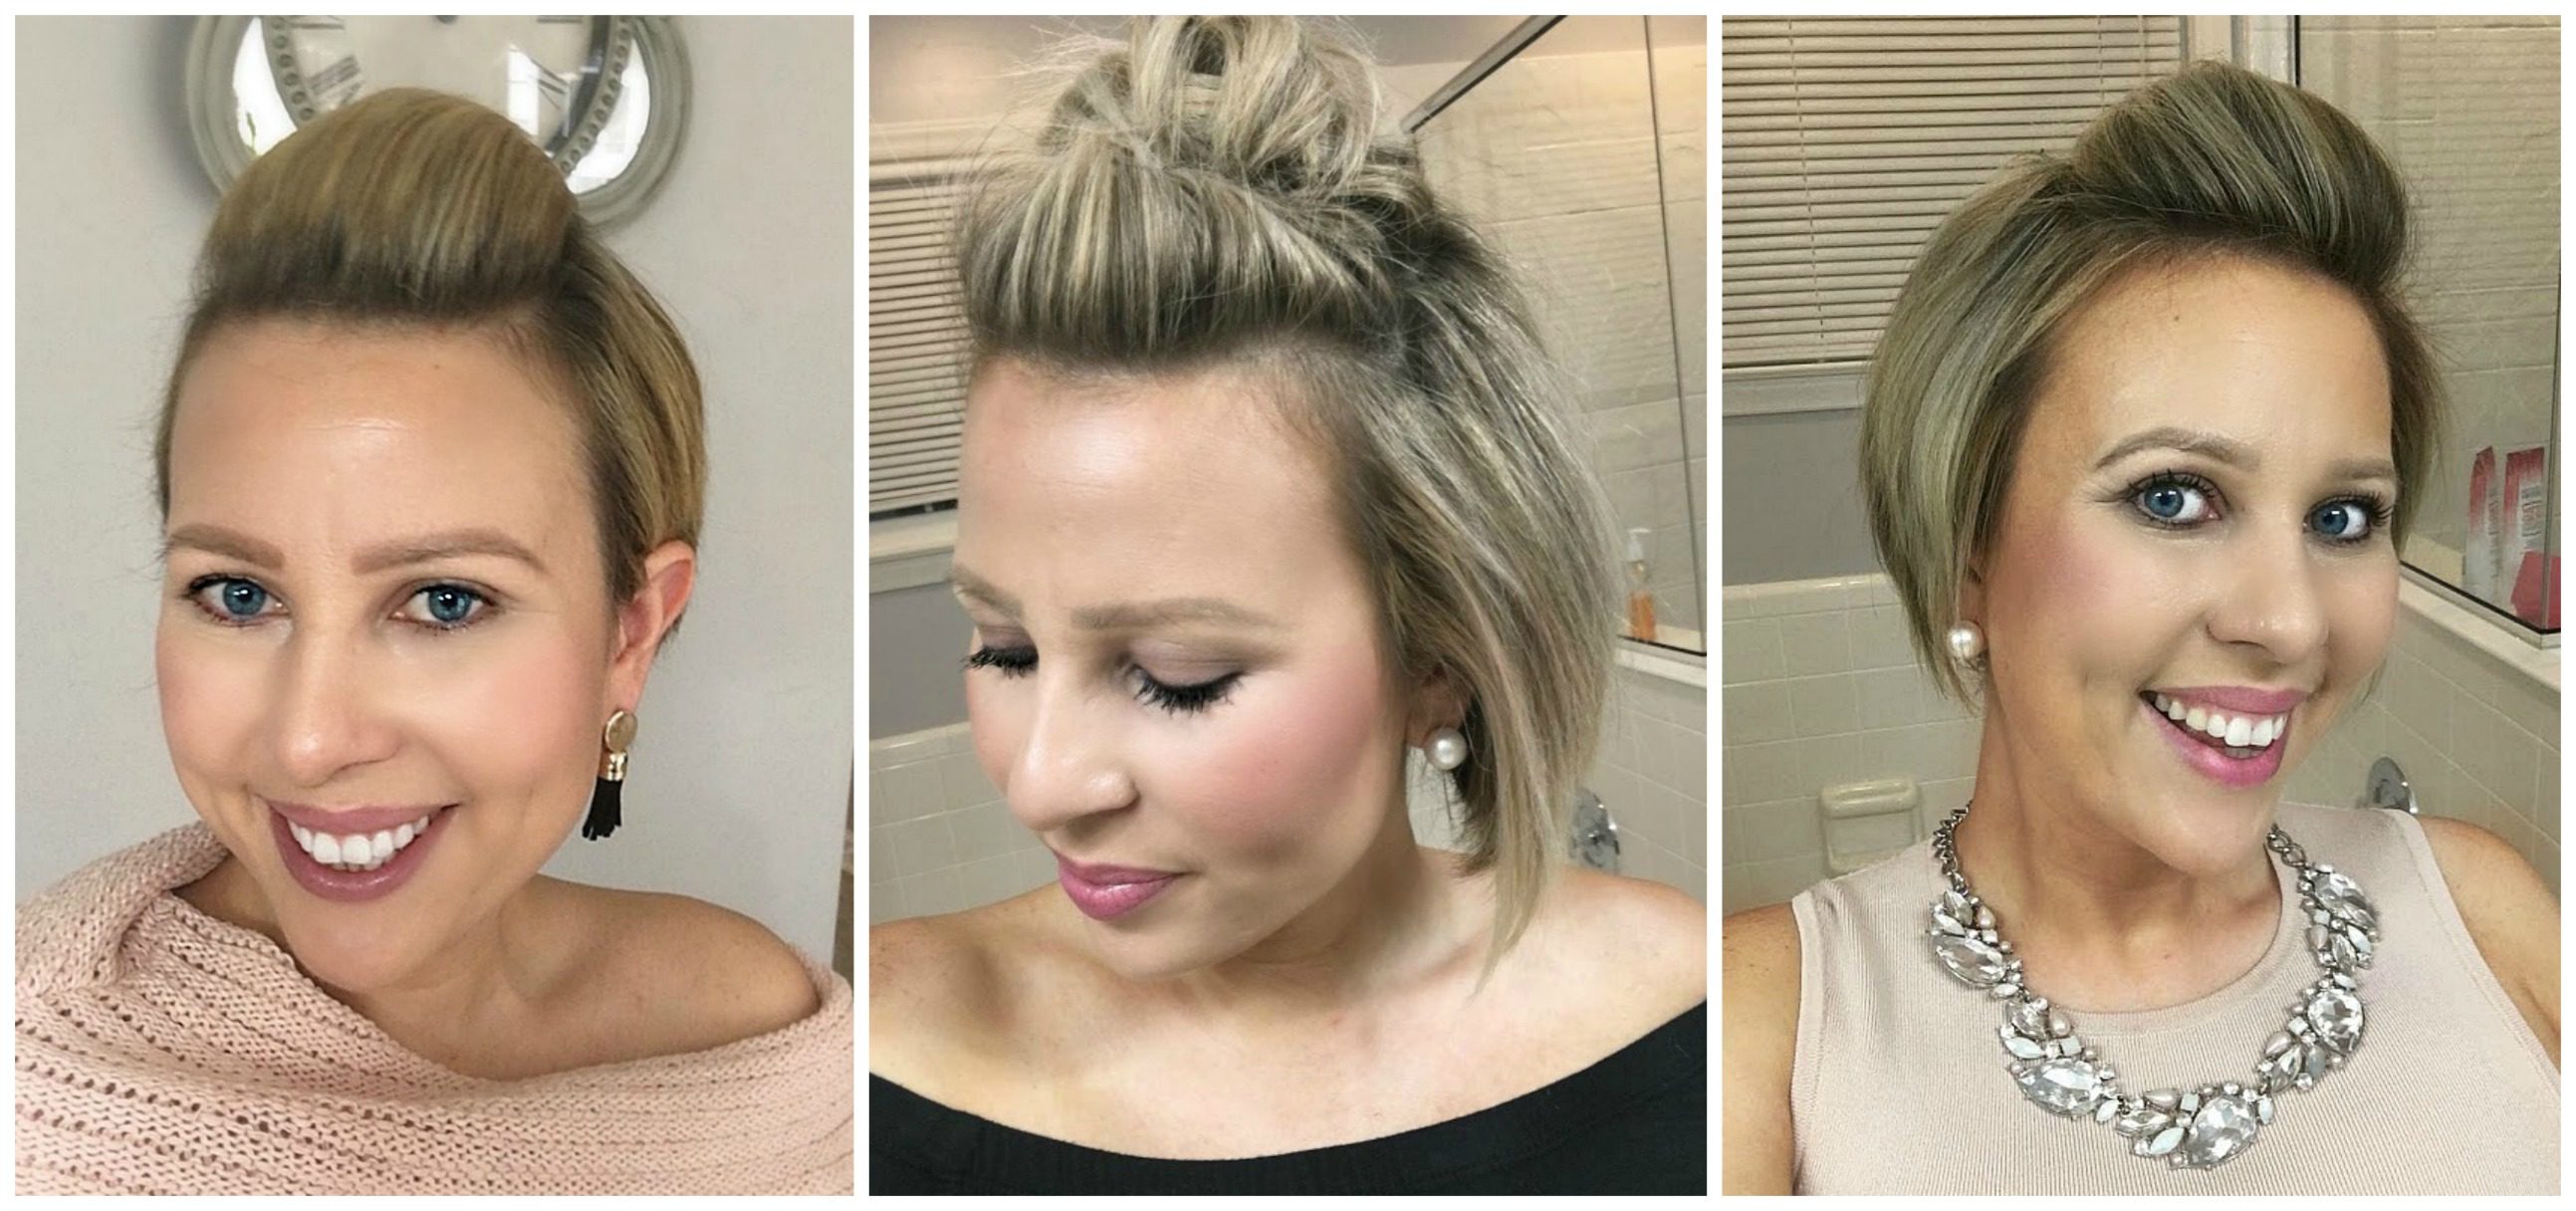 Bouffant | How to Style Short Hair After Chemo